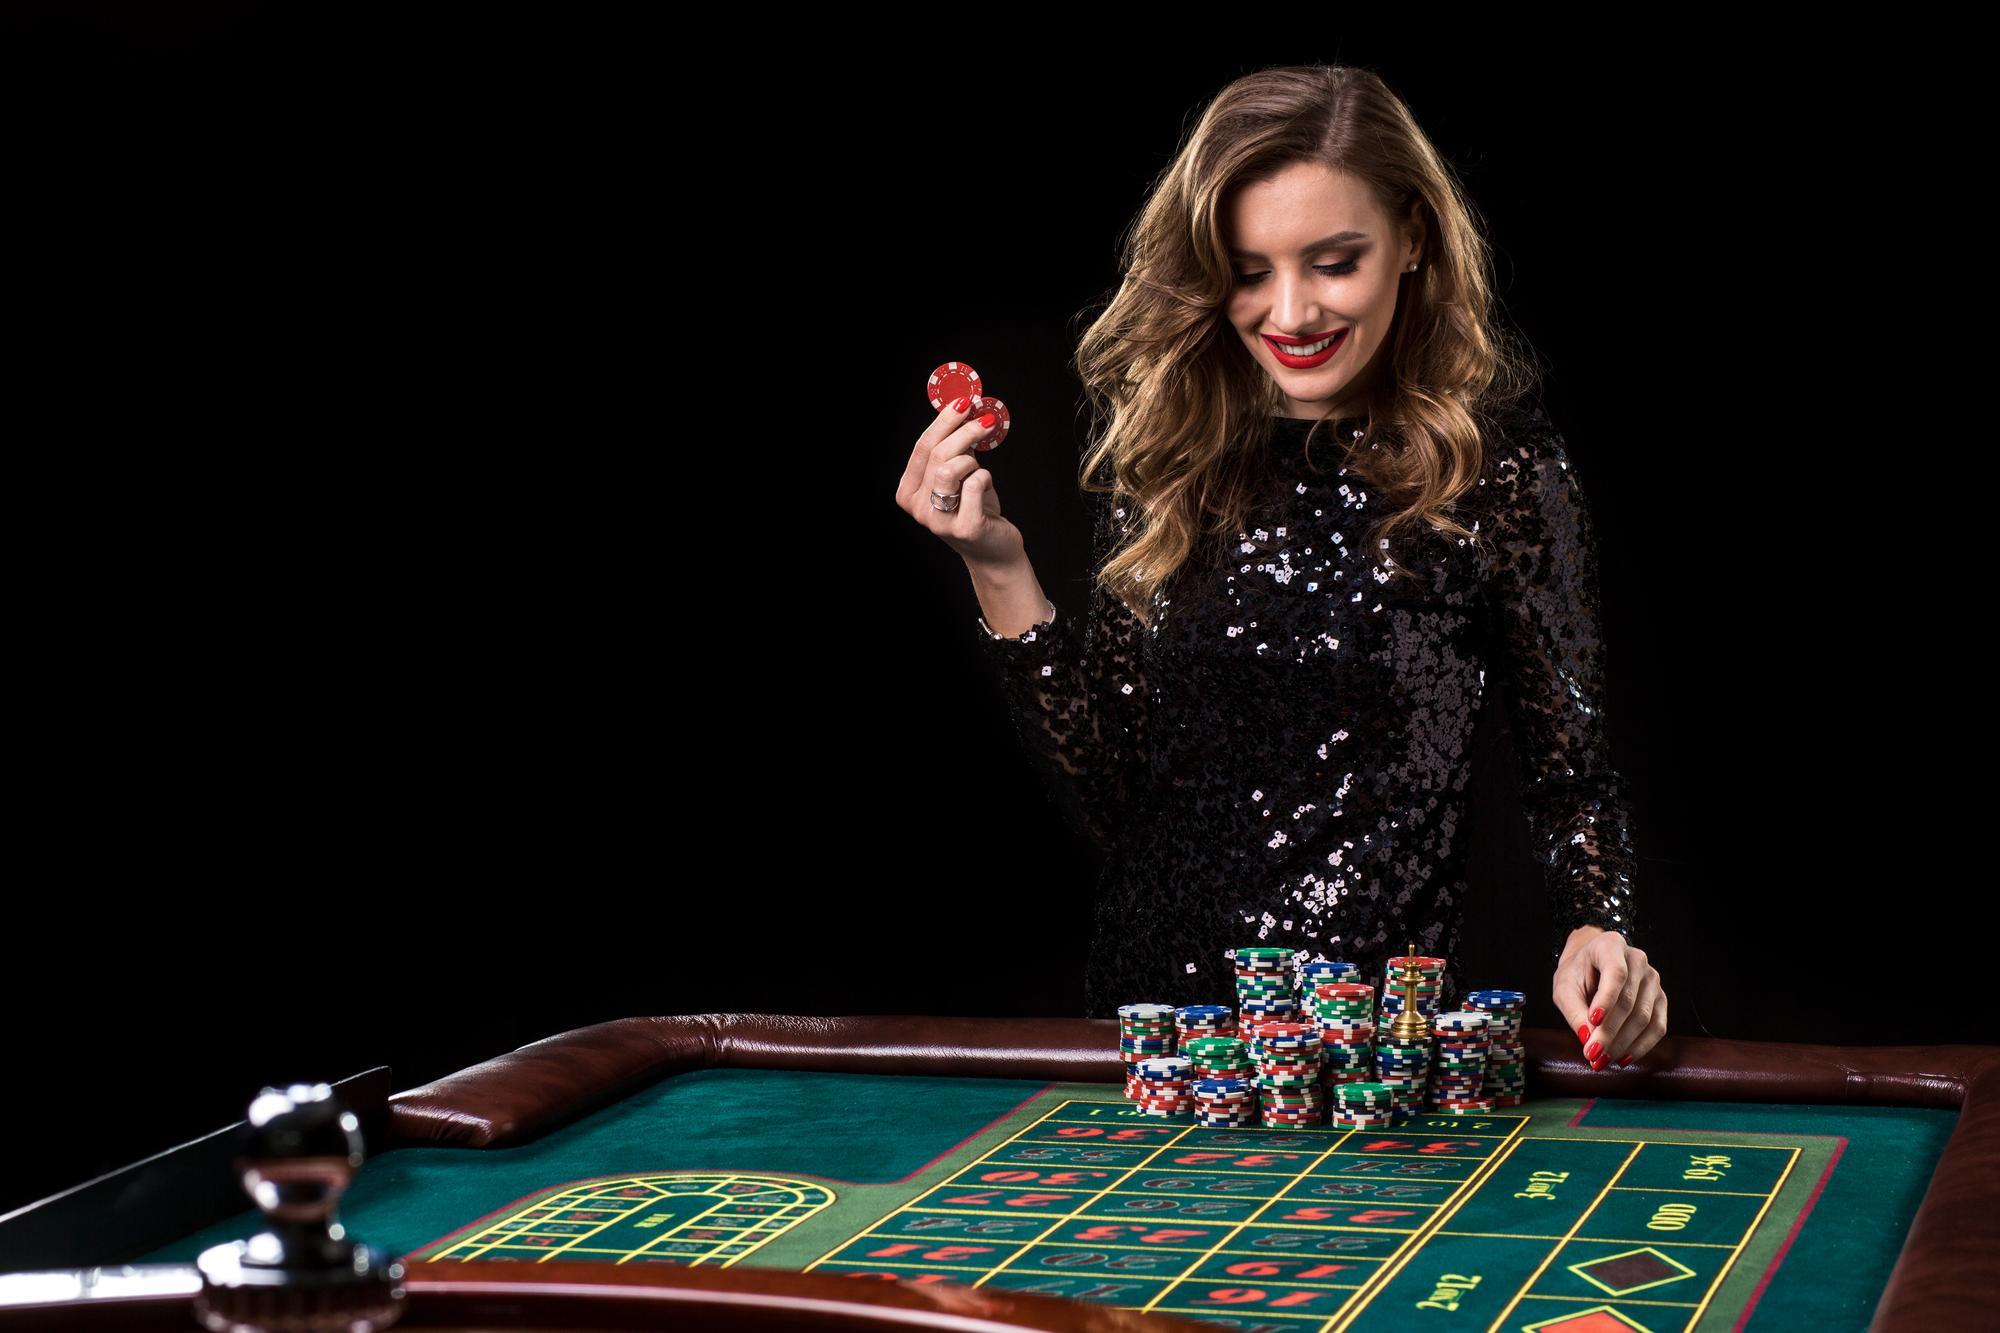 sexy-woman-black-dress-playing-casino-woman-stakes-piles-chips-playing-roulette-casino-club-gambling-roulette